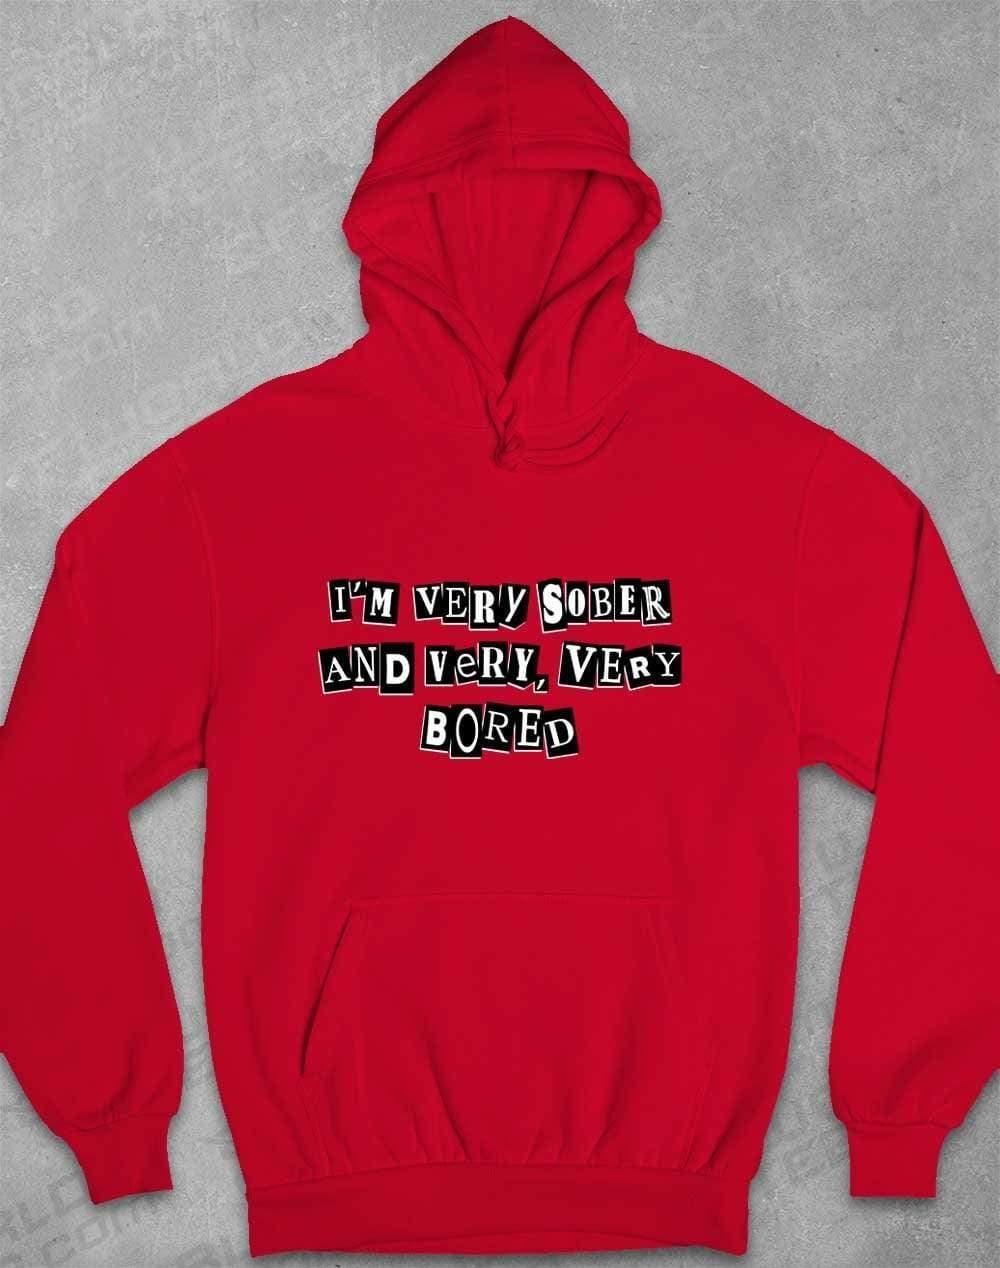 I'm Very Sober and Very Very Bored Hoodie XS / Fire Red  - Off World Tees